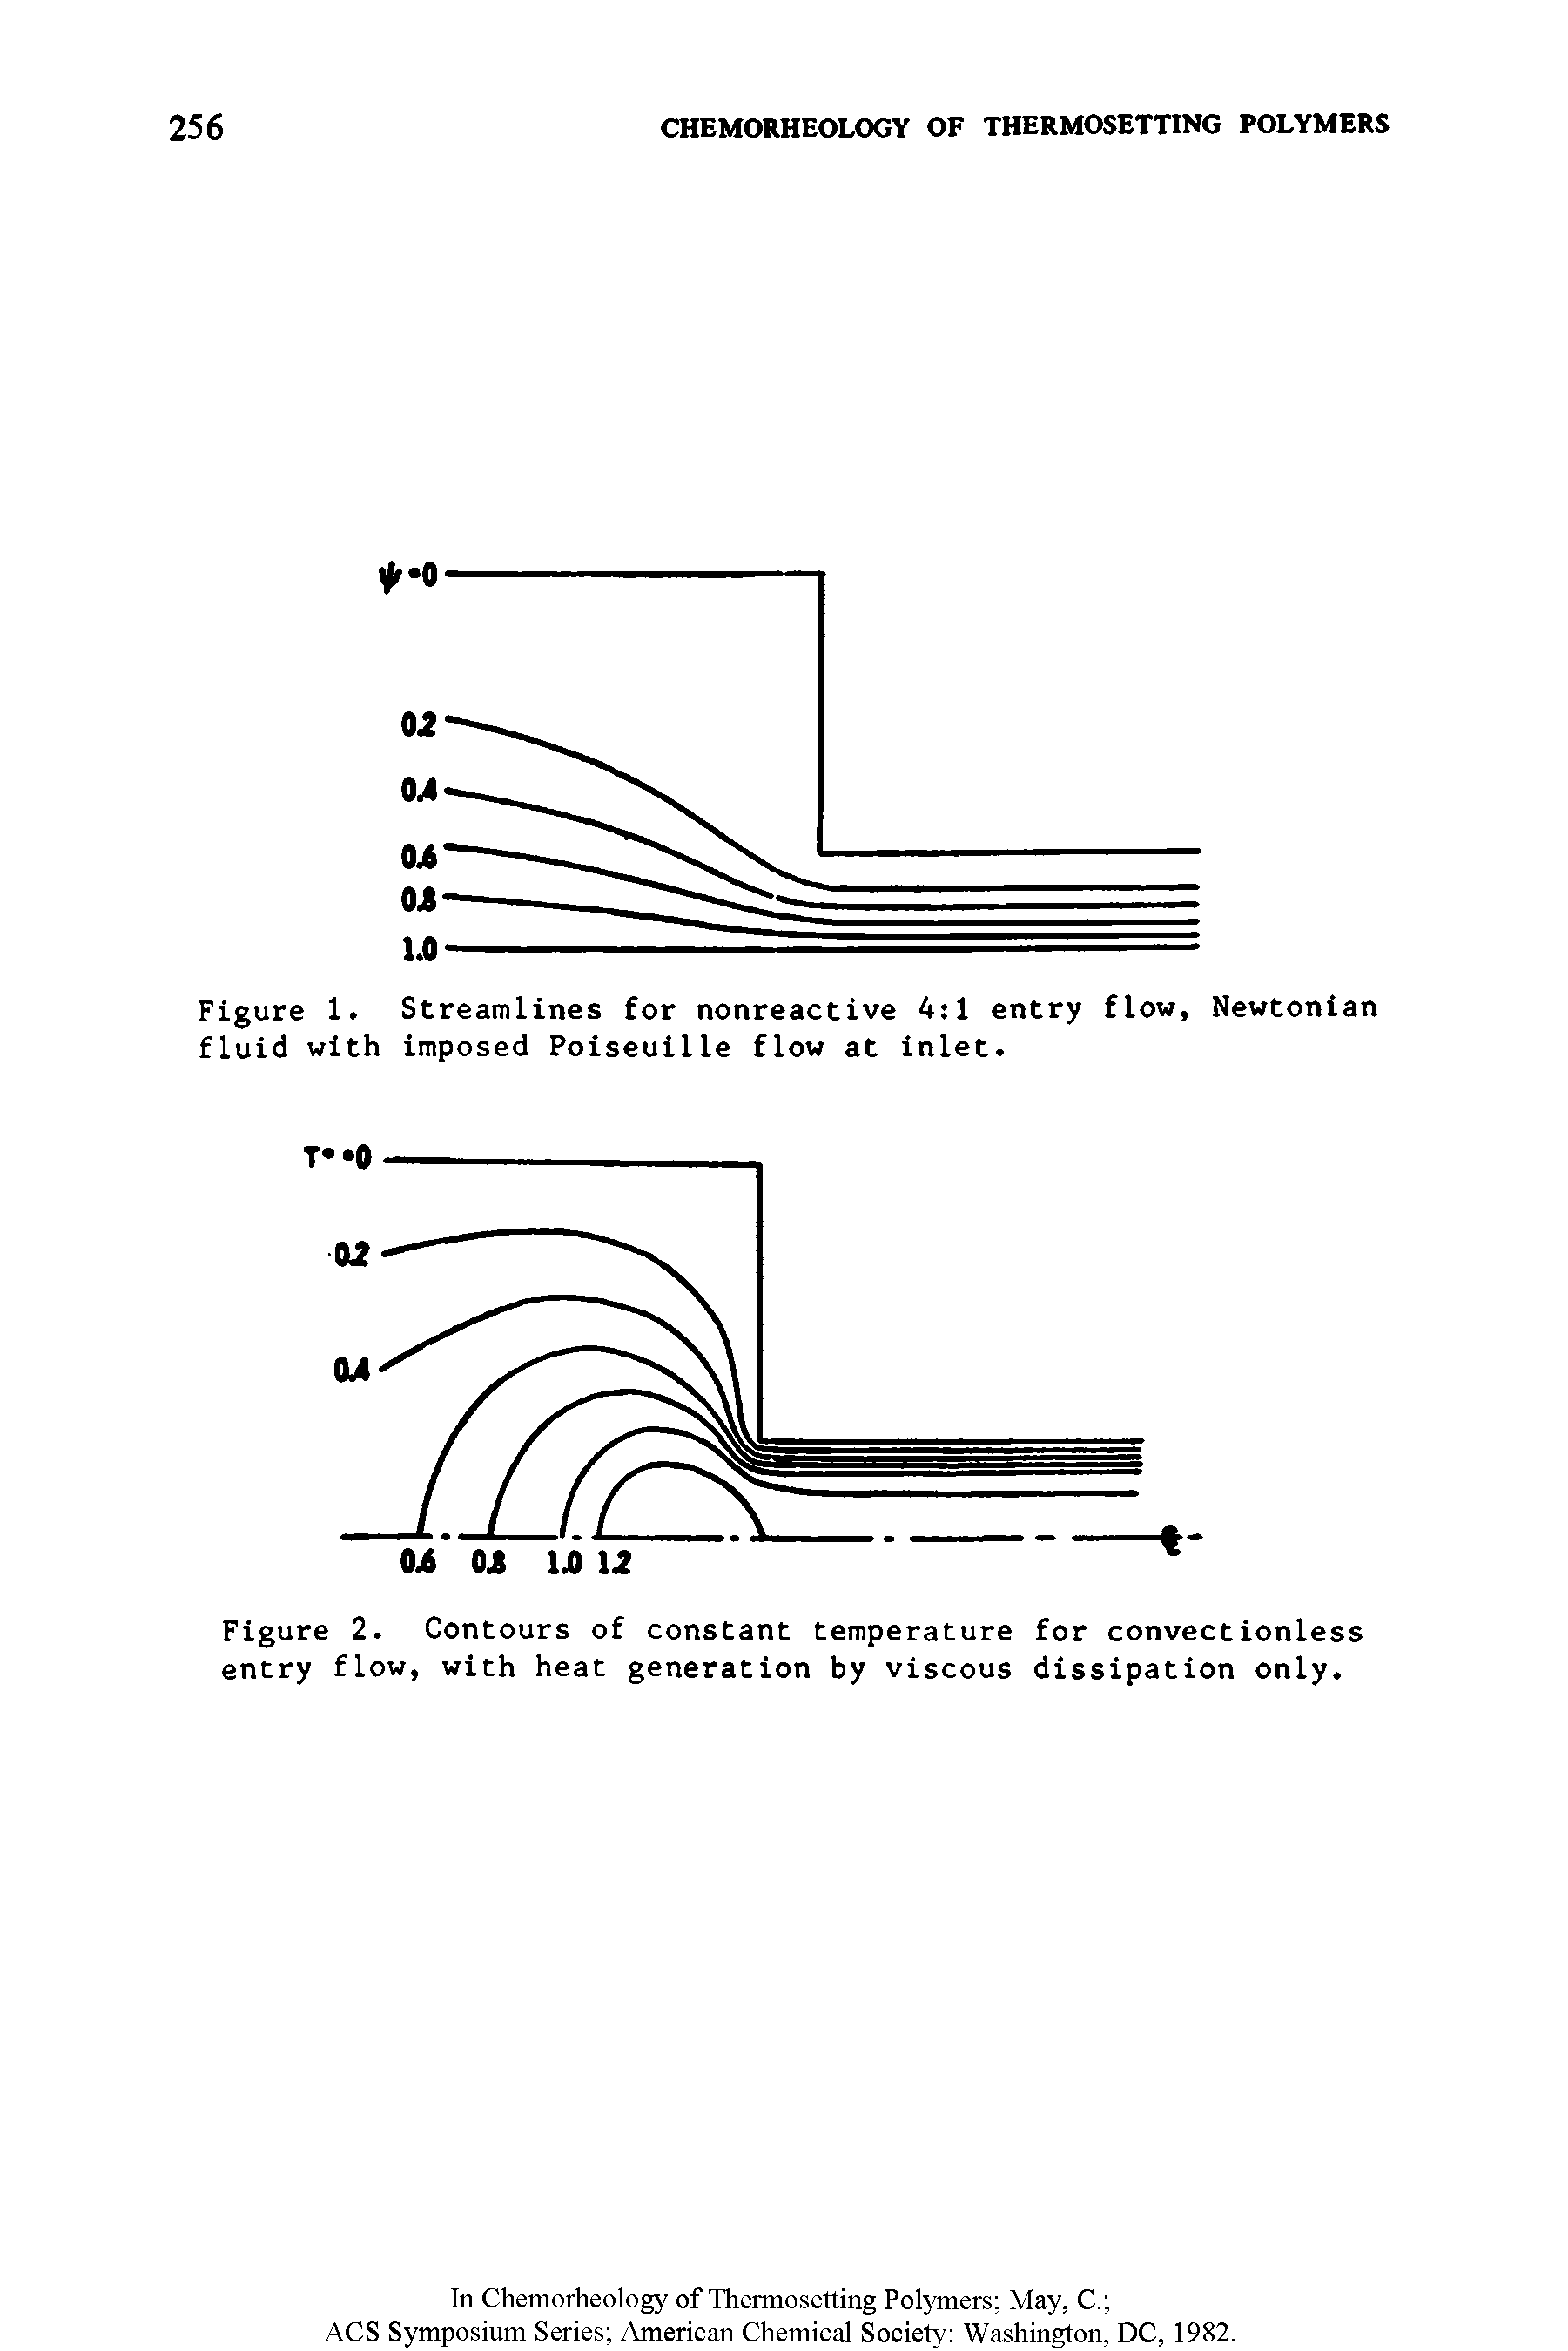 Figure 2. Contours of constant temperature for convectionless entry flow, with heat generation by viscous dissipation only.